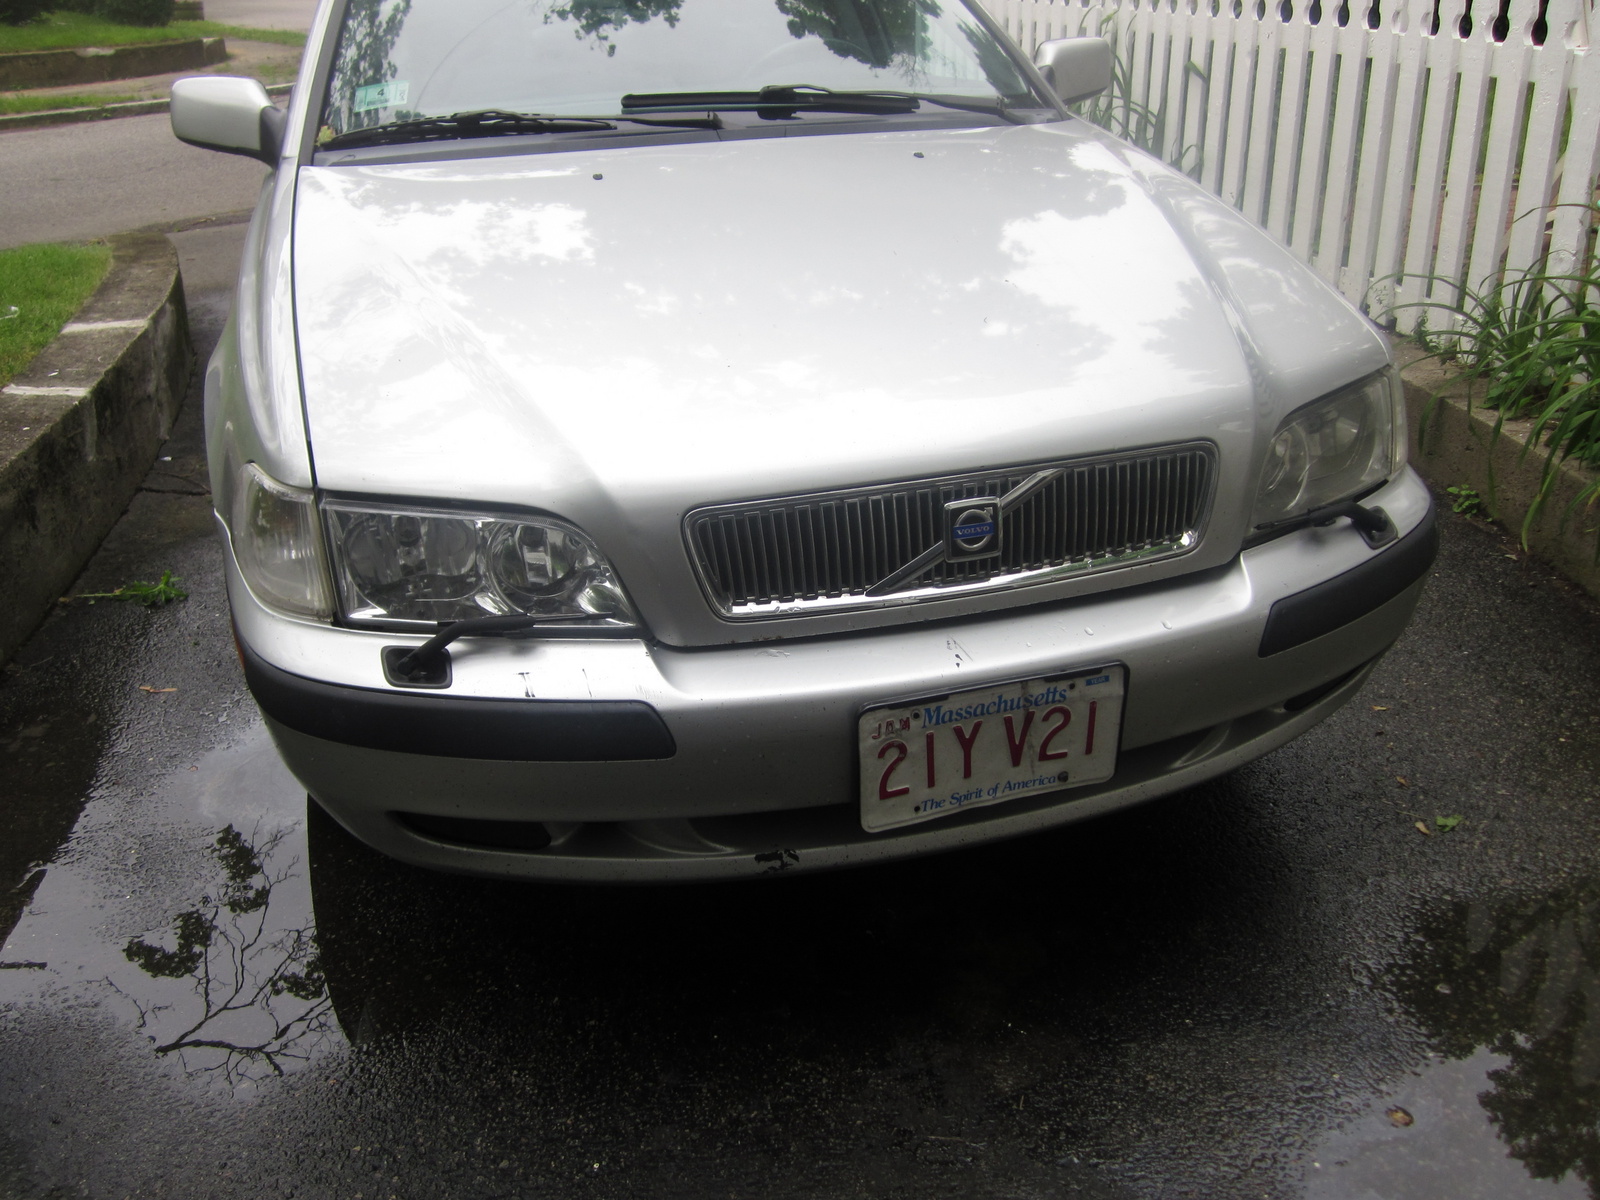 2001 Volvo S40 Overview. 2001 Volvo S40. Volvo has made several improvements